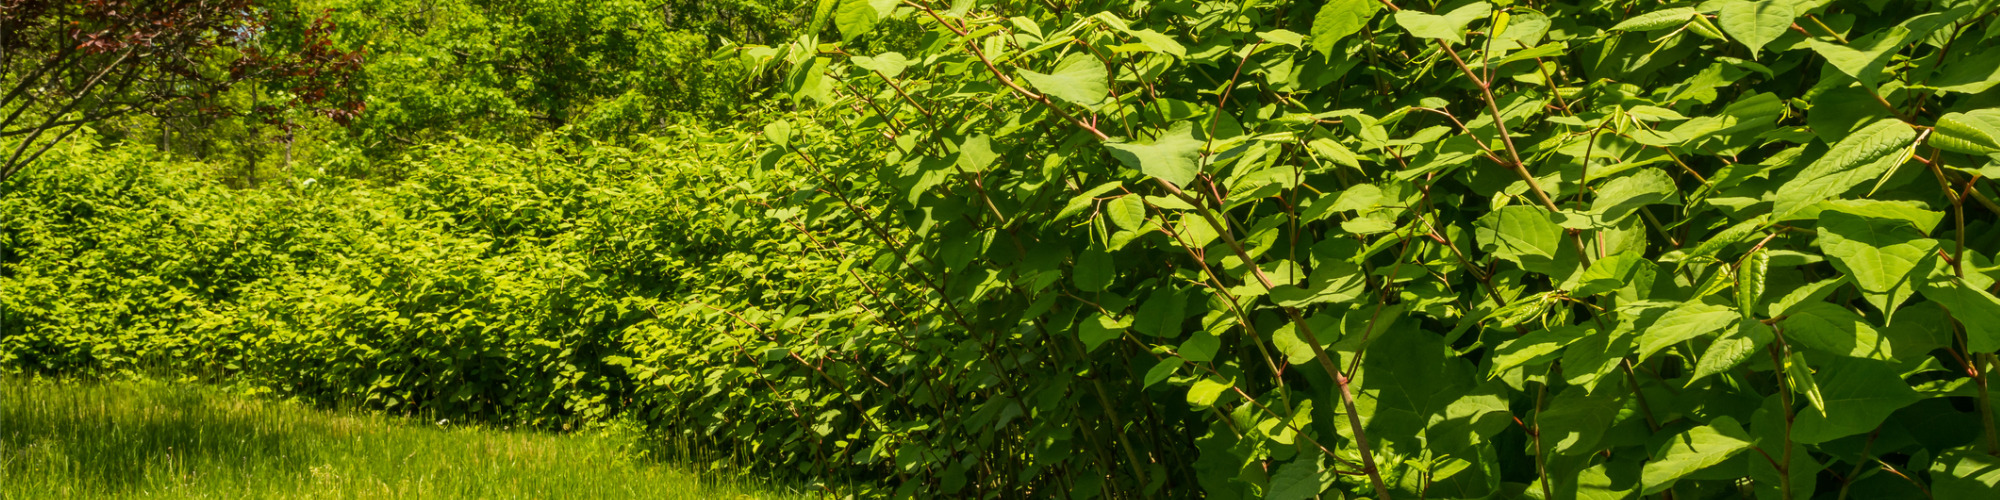 Japanese Knotweed - Yet More Responsibility for Conveyancers?